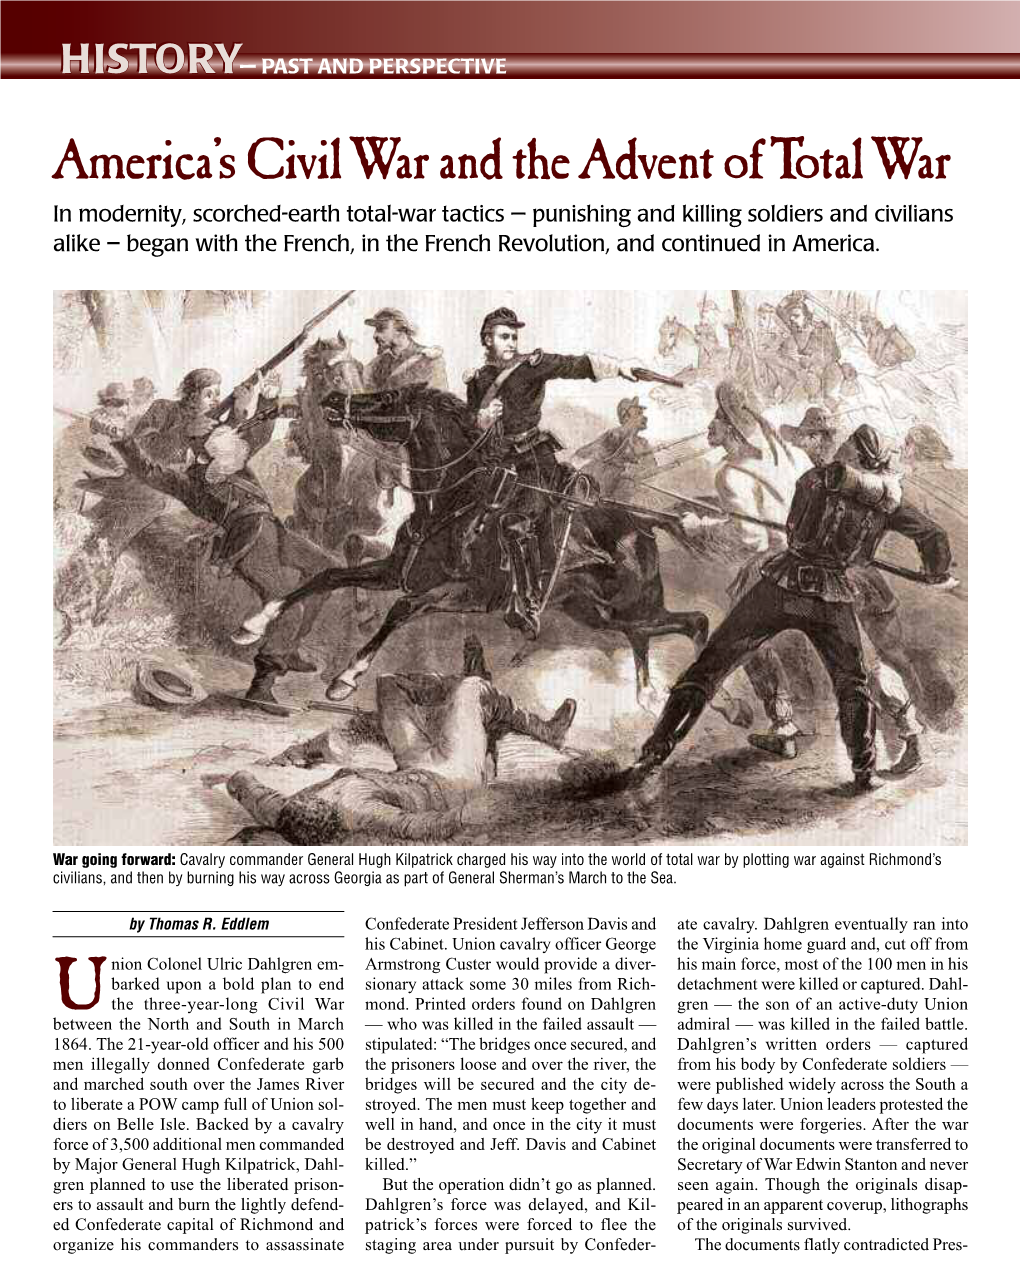 America's Civil War and the Advent of Total